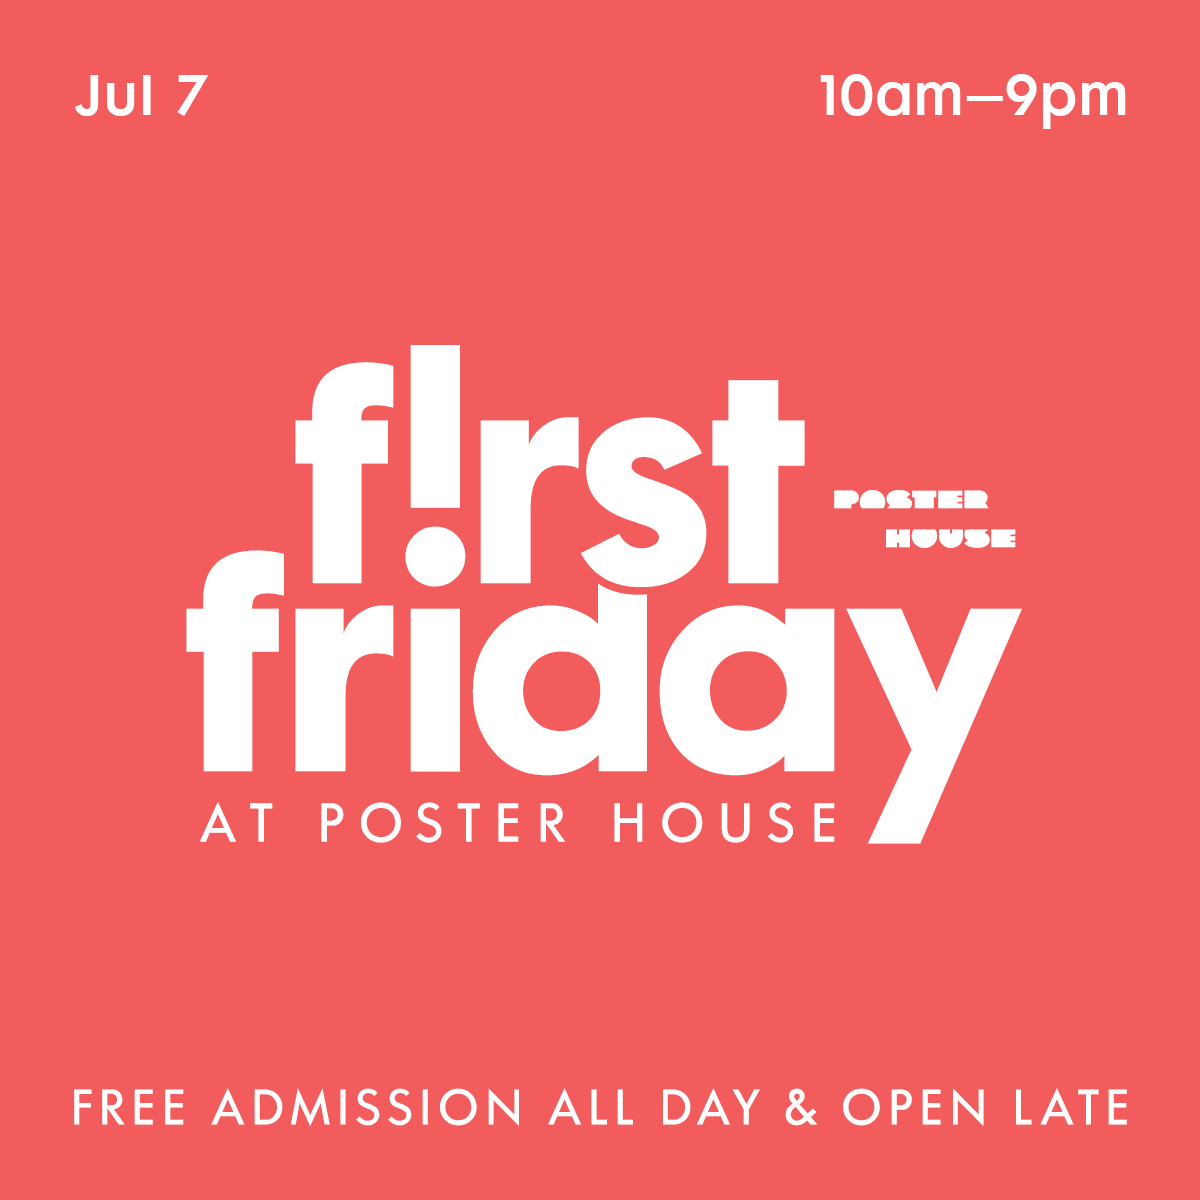 Light red text graphic promoting First Friday at Poster House, free admission on July 7.